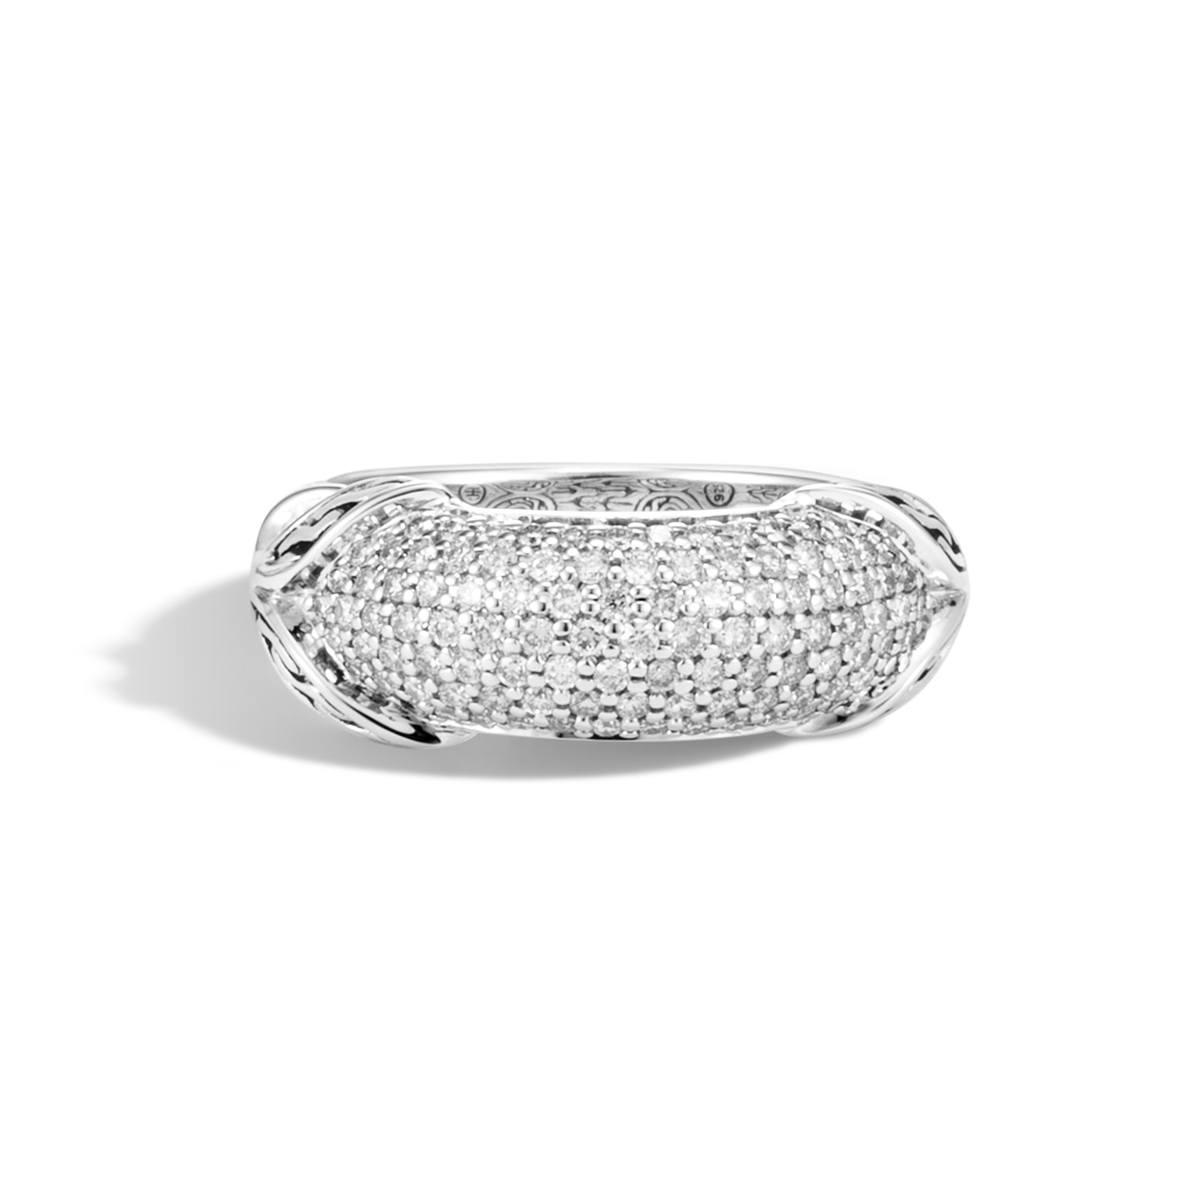 John Hardy Asli Classic Chain Link Dome Ring in Silver with Diamonds 0